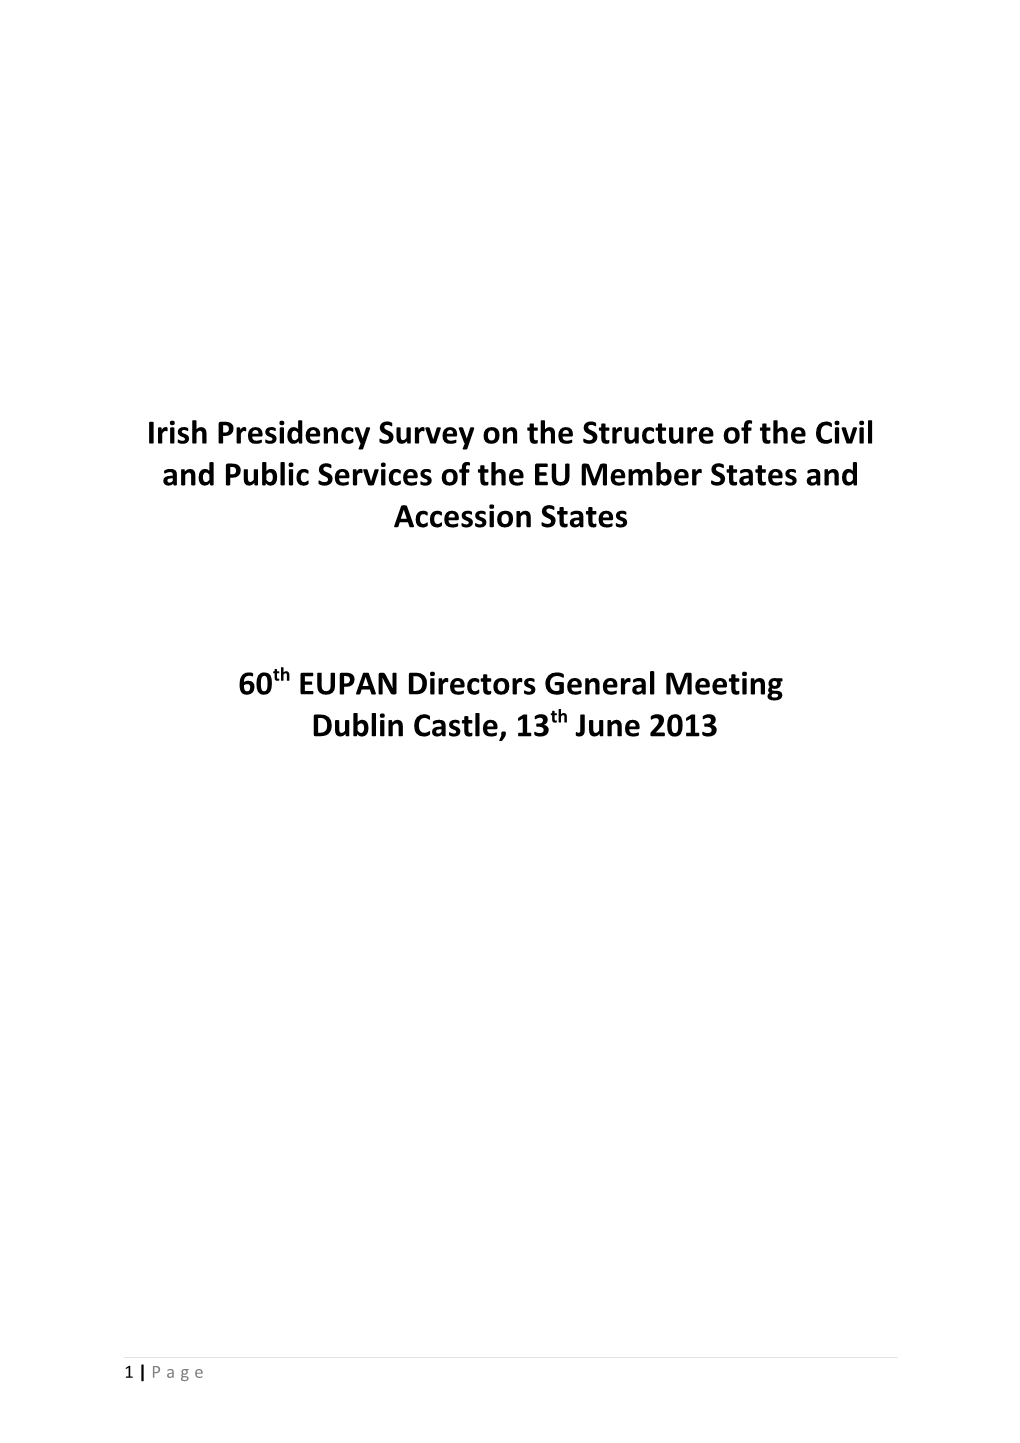 Irish Presidency Survey on the Structure of the Civil and Public Services of the EU Member